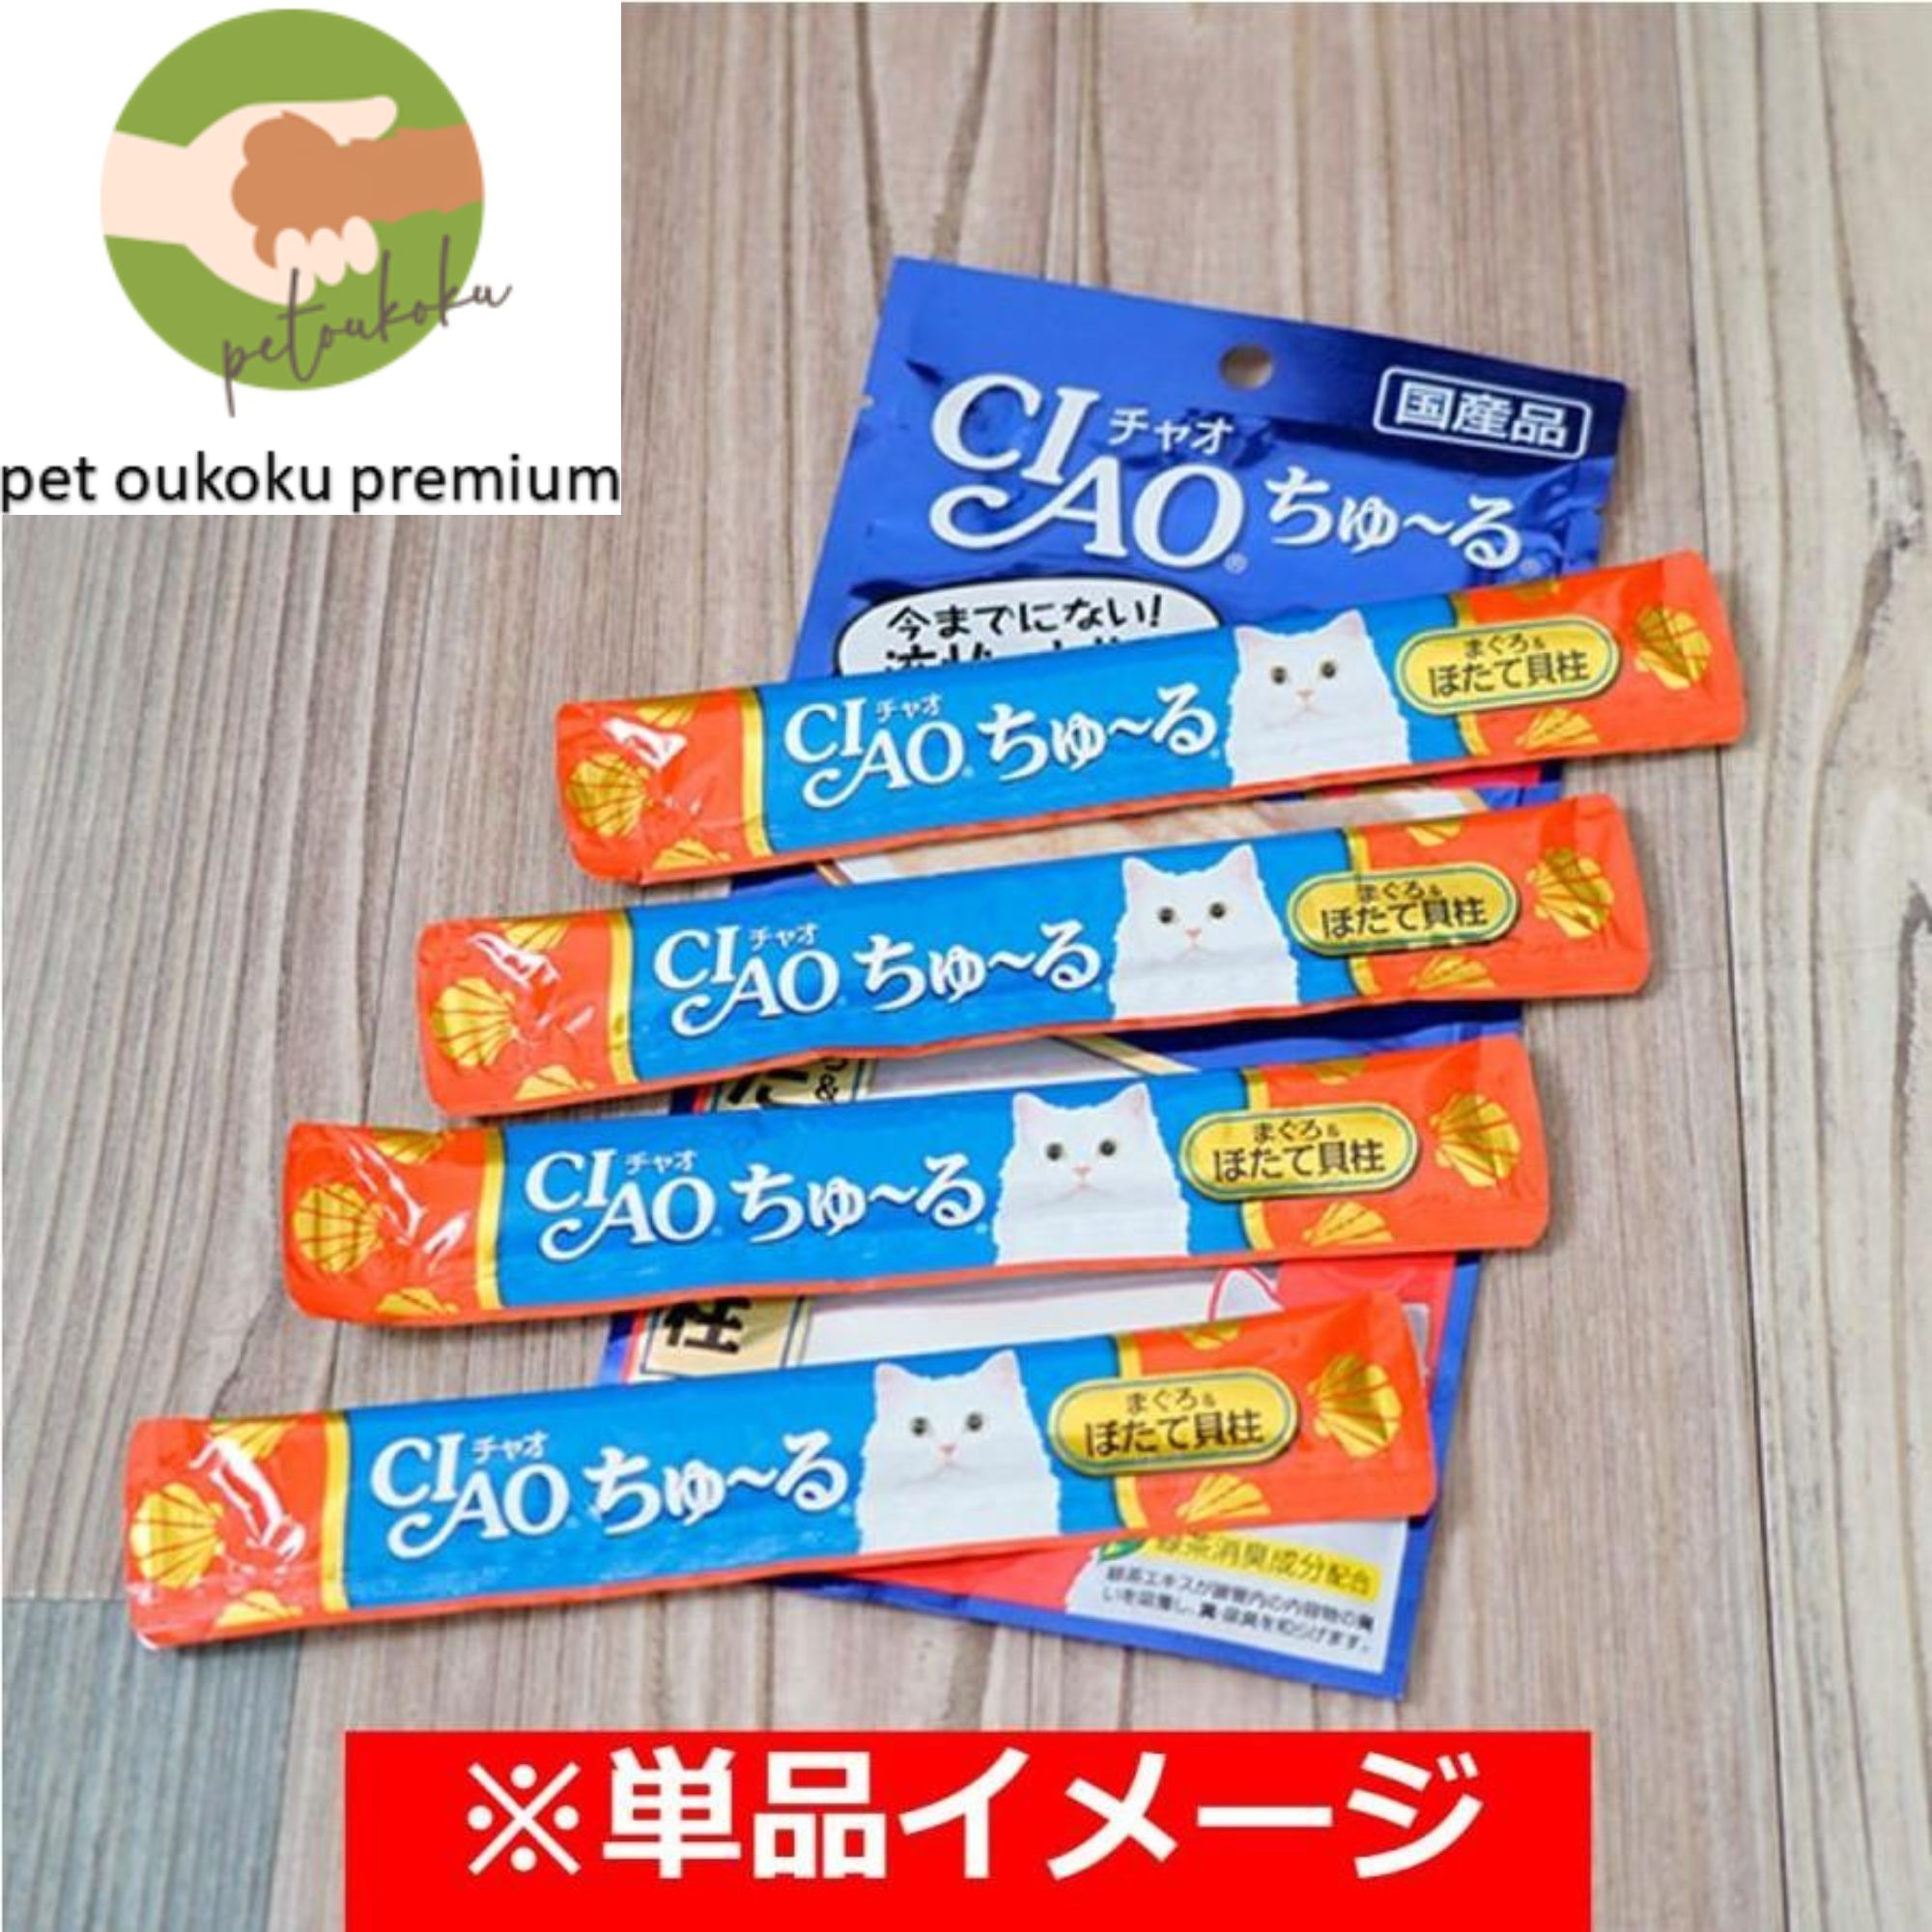 CIAO..~.120 pcs insertion ...~. gourmet synthesis nutrition meal ... seafood variety ... Ciao chu-ru